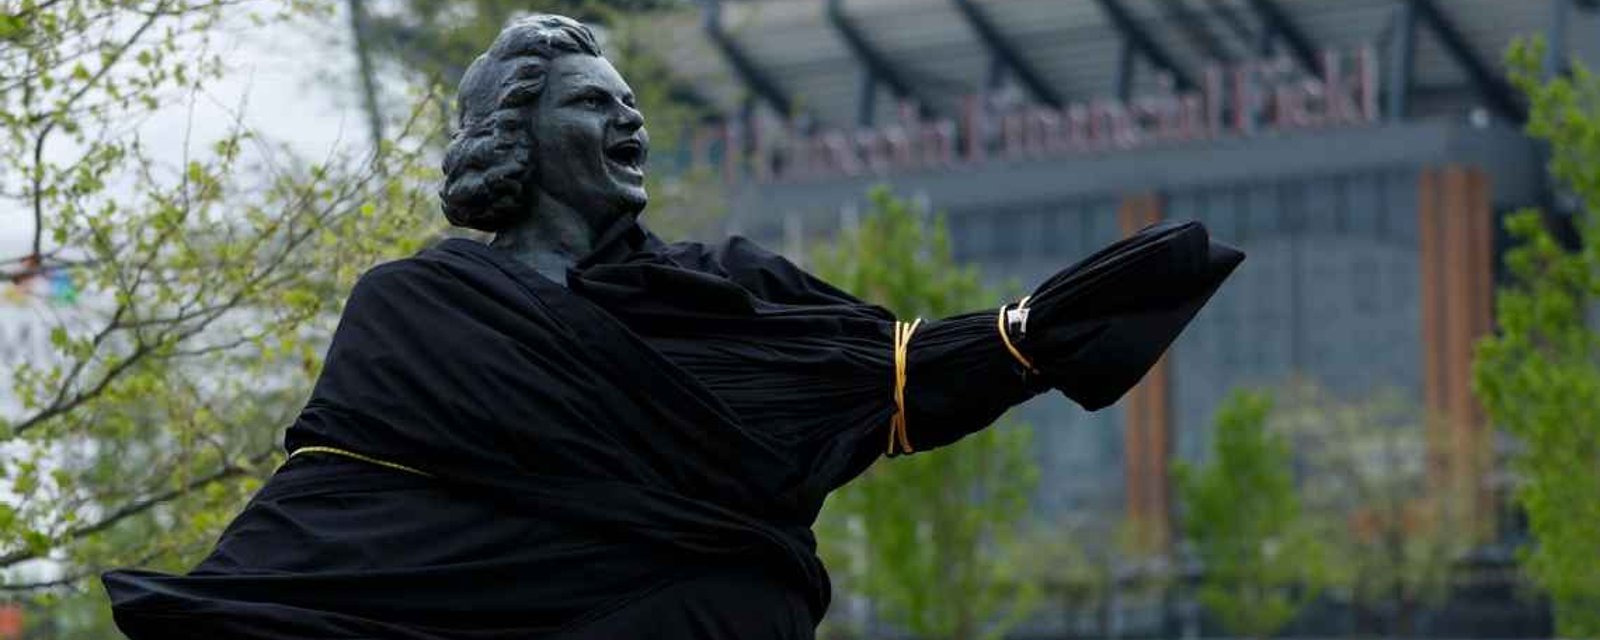 Flyers pull down historic statue after accusations of racism.